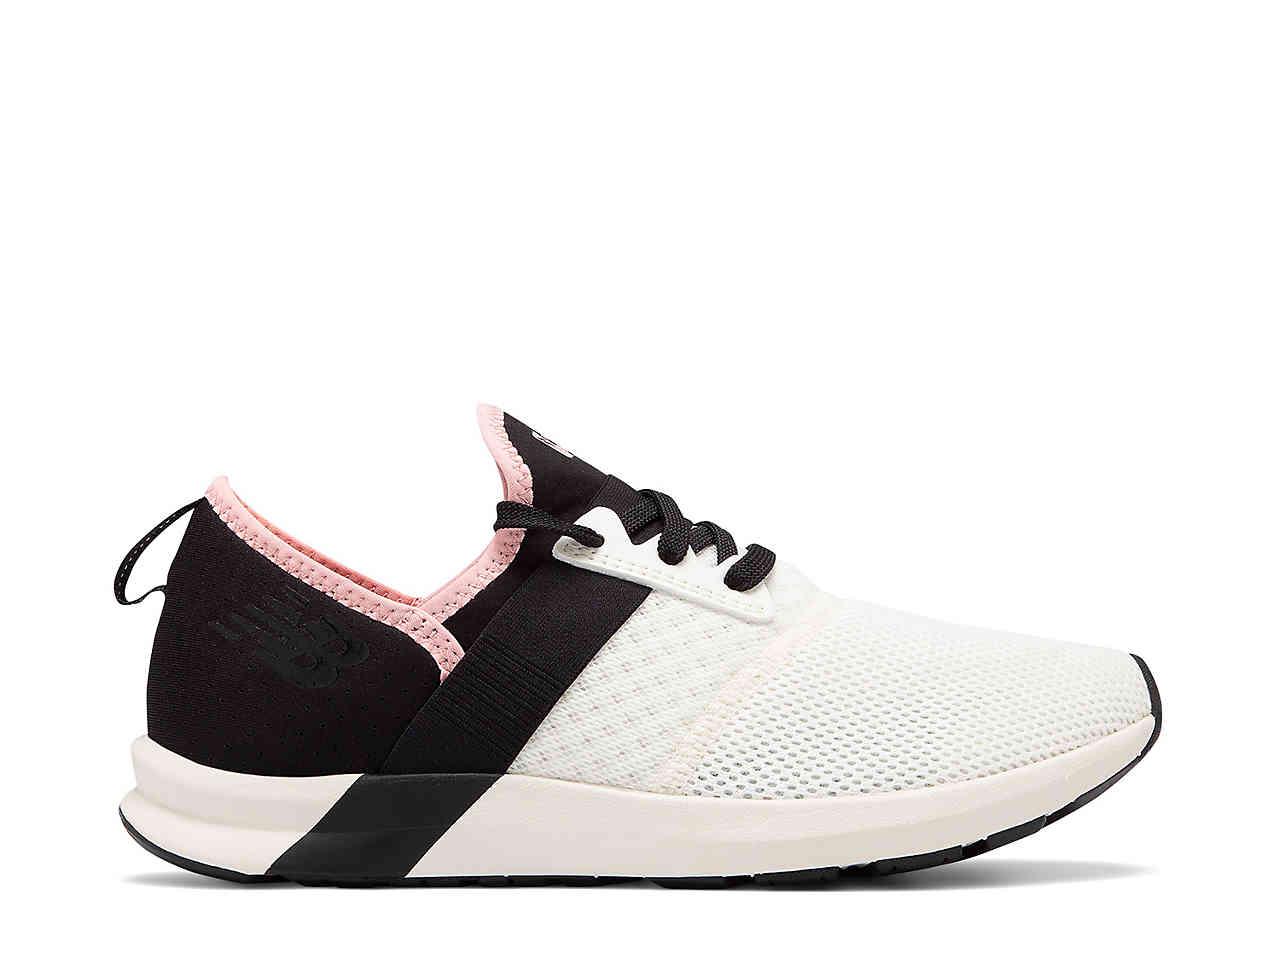 New Balance Fuelcore Nergize Lightweight Training Shoe in White/Black/Pink  (Black) | Lyst